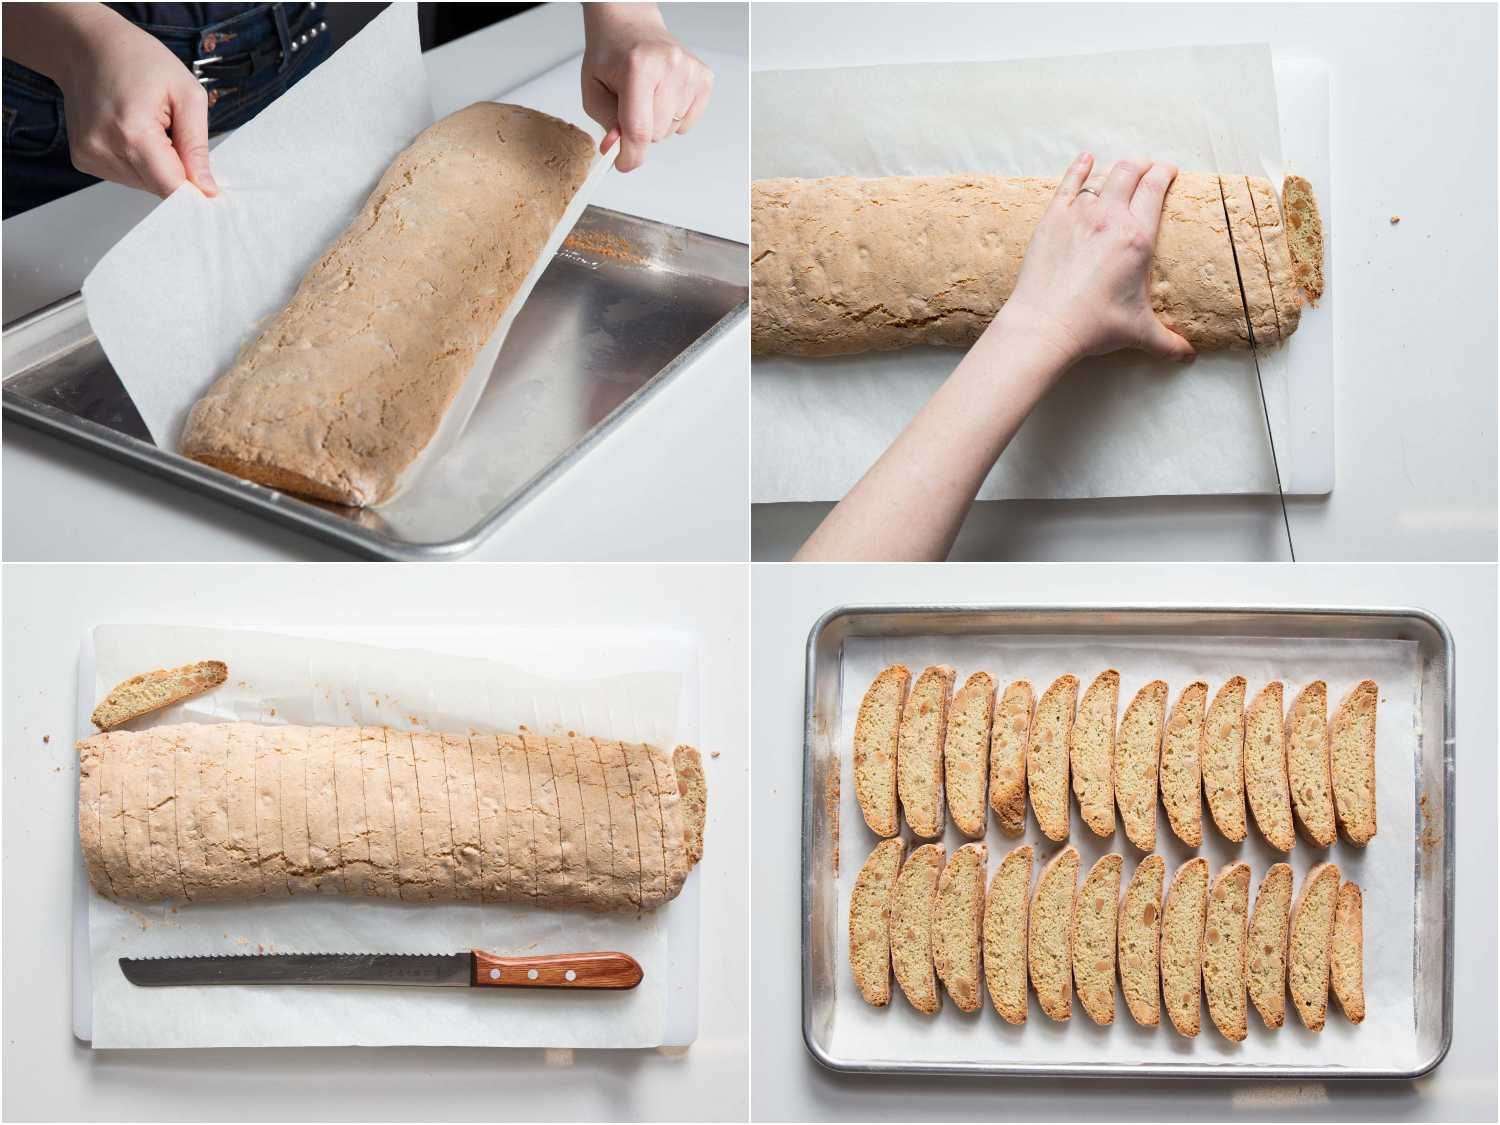 Collage of slicing the biscotti and laying the slices flat on a parchment-lined baking sheet.